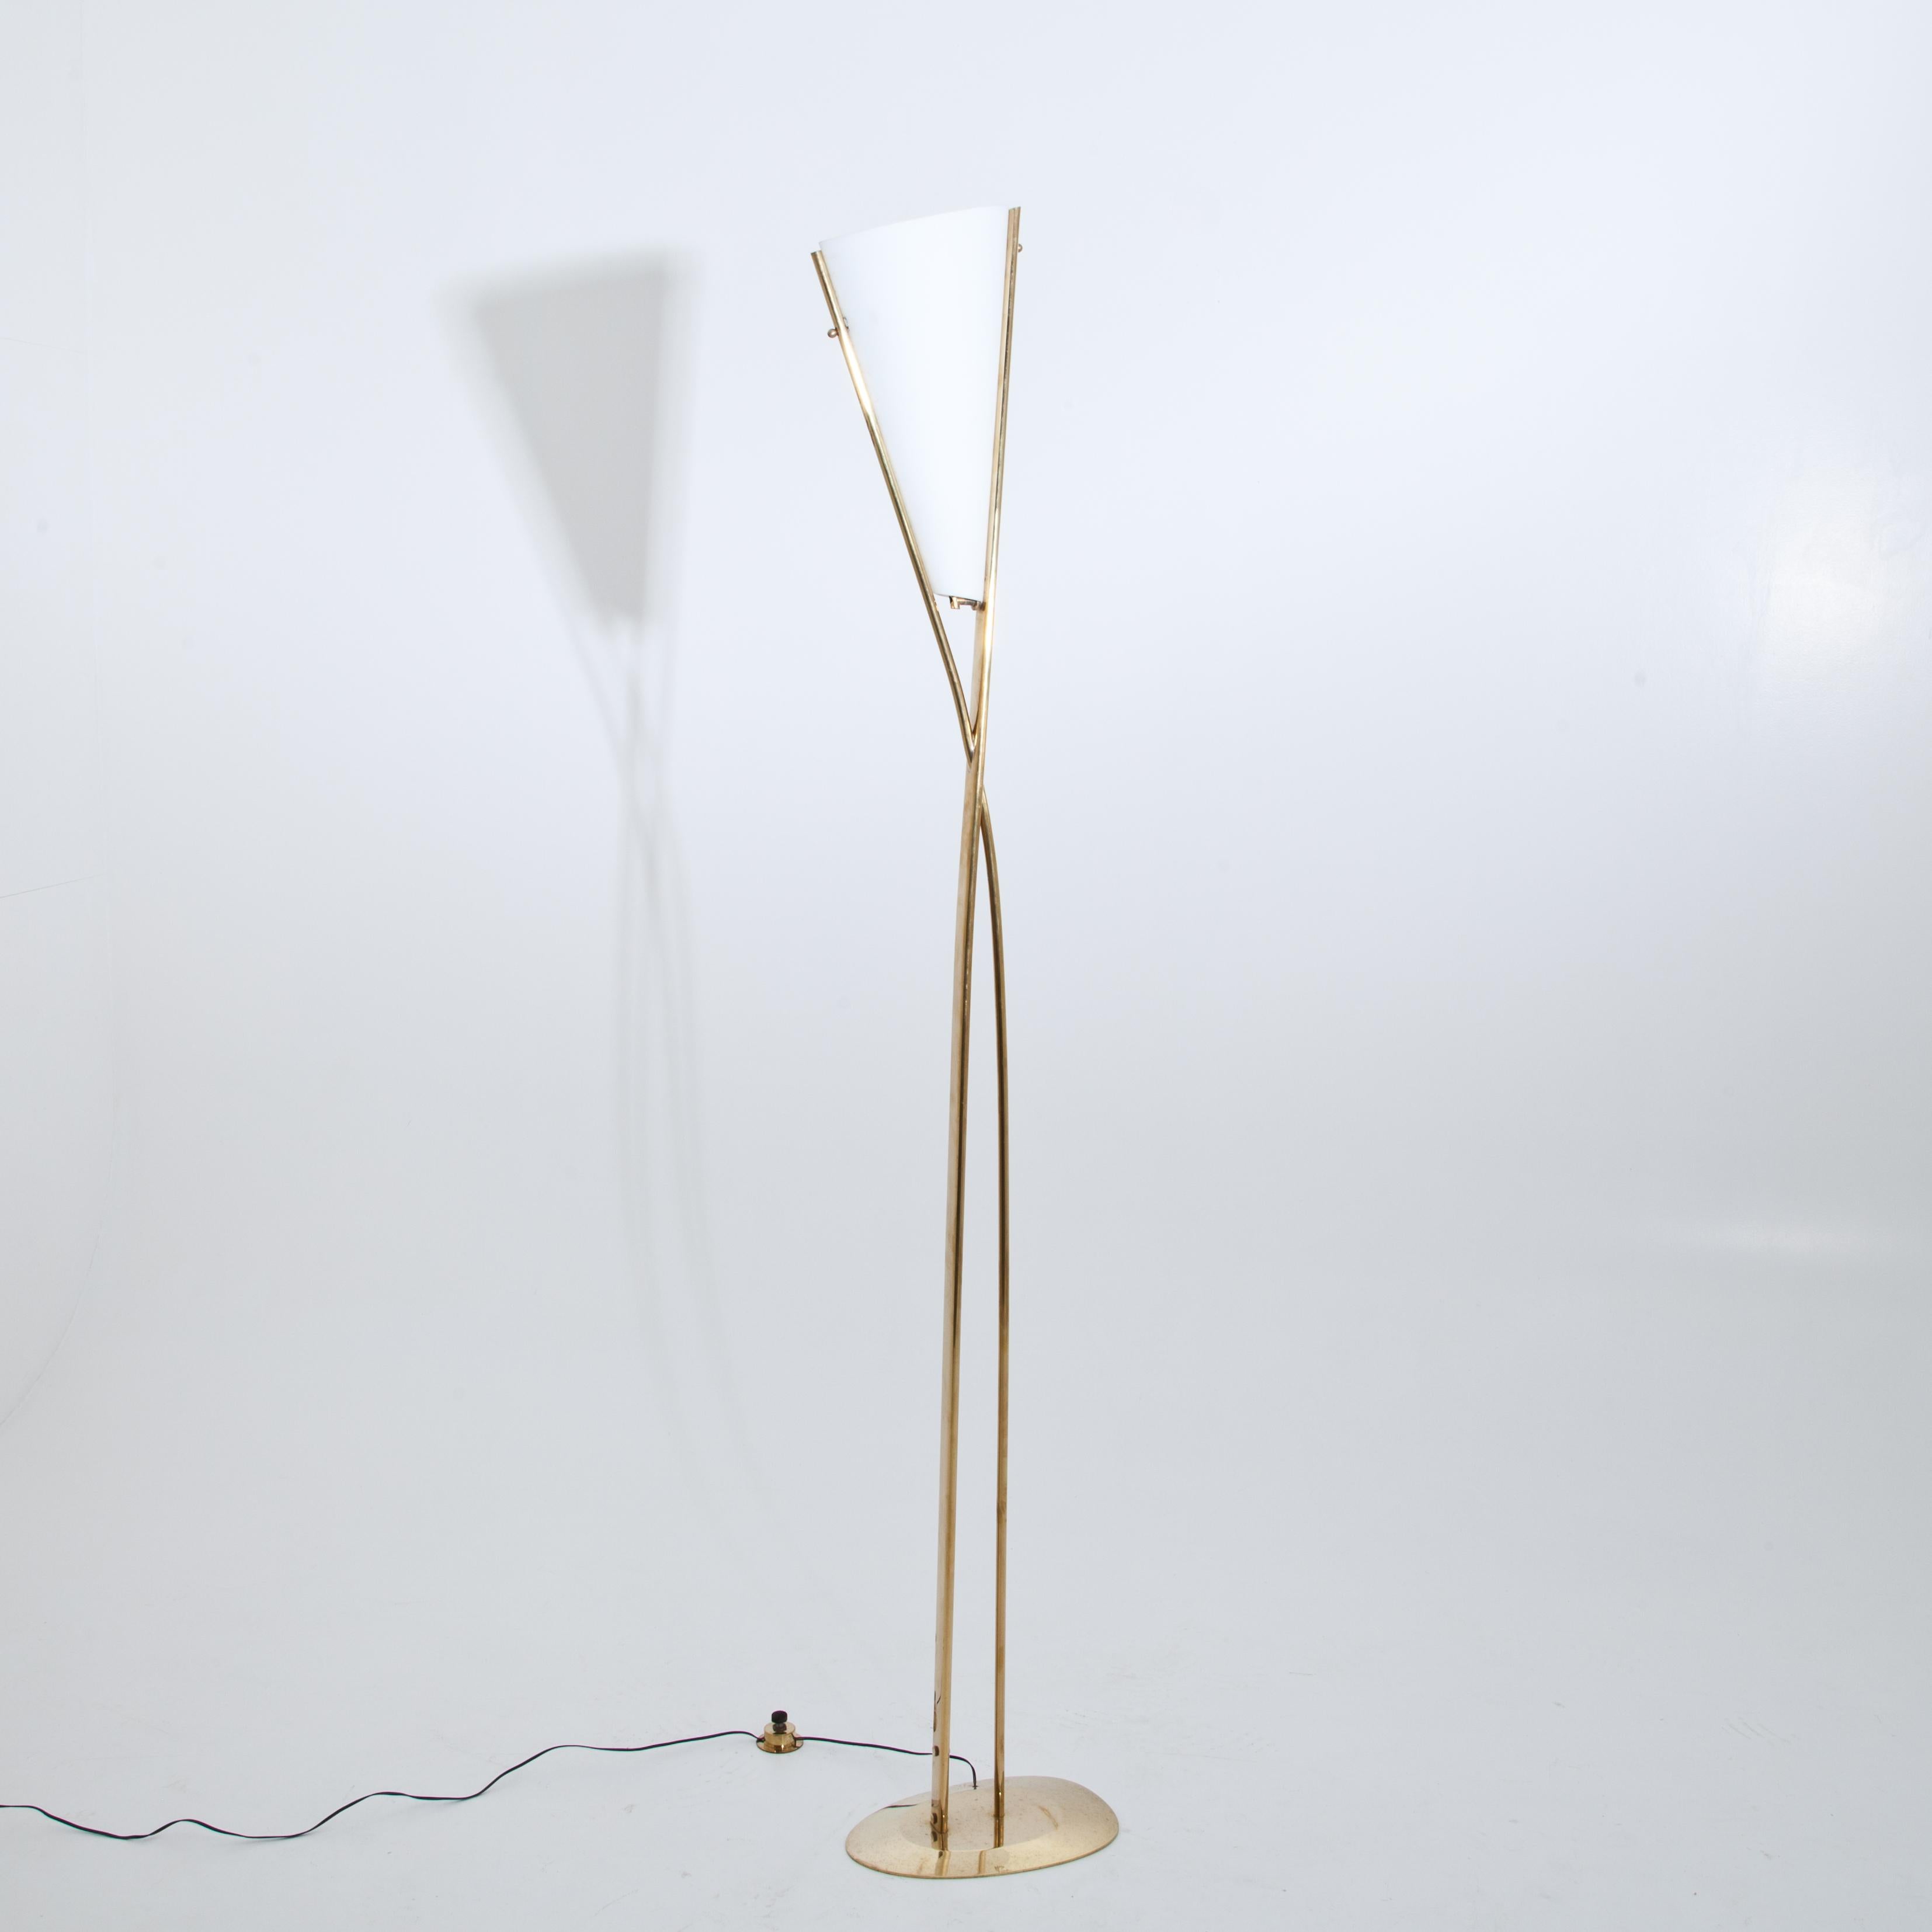 Floor lamp on an oval flat stand with two intersecting brass rods and a funnel-shaped opal glass shade. Designed by Max Ingrand for Fontana Arte in 1958. Lit: Pierre-Emmanuel Martin-Vivier, Max Ingrand - du Verre à la Lumière. Paris 2009, p. 220.